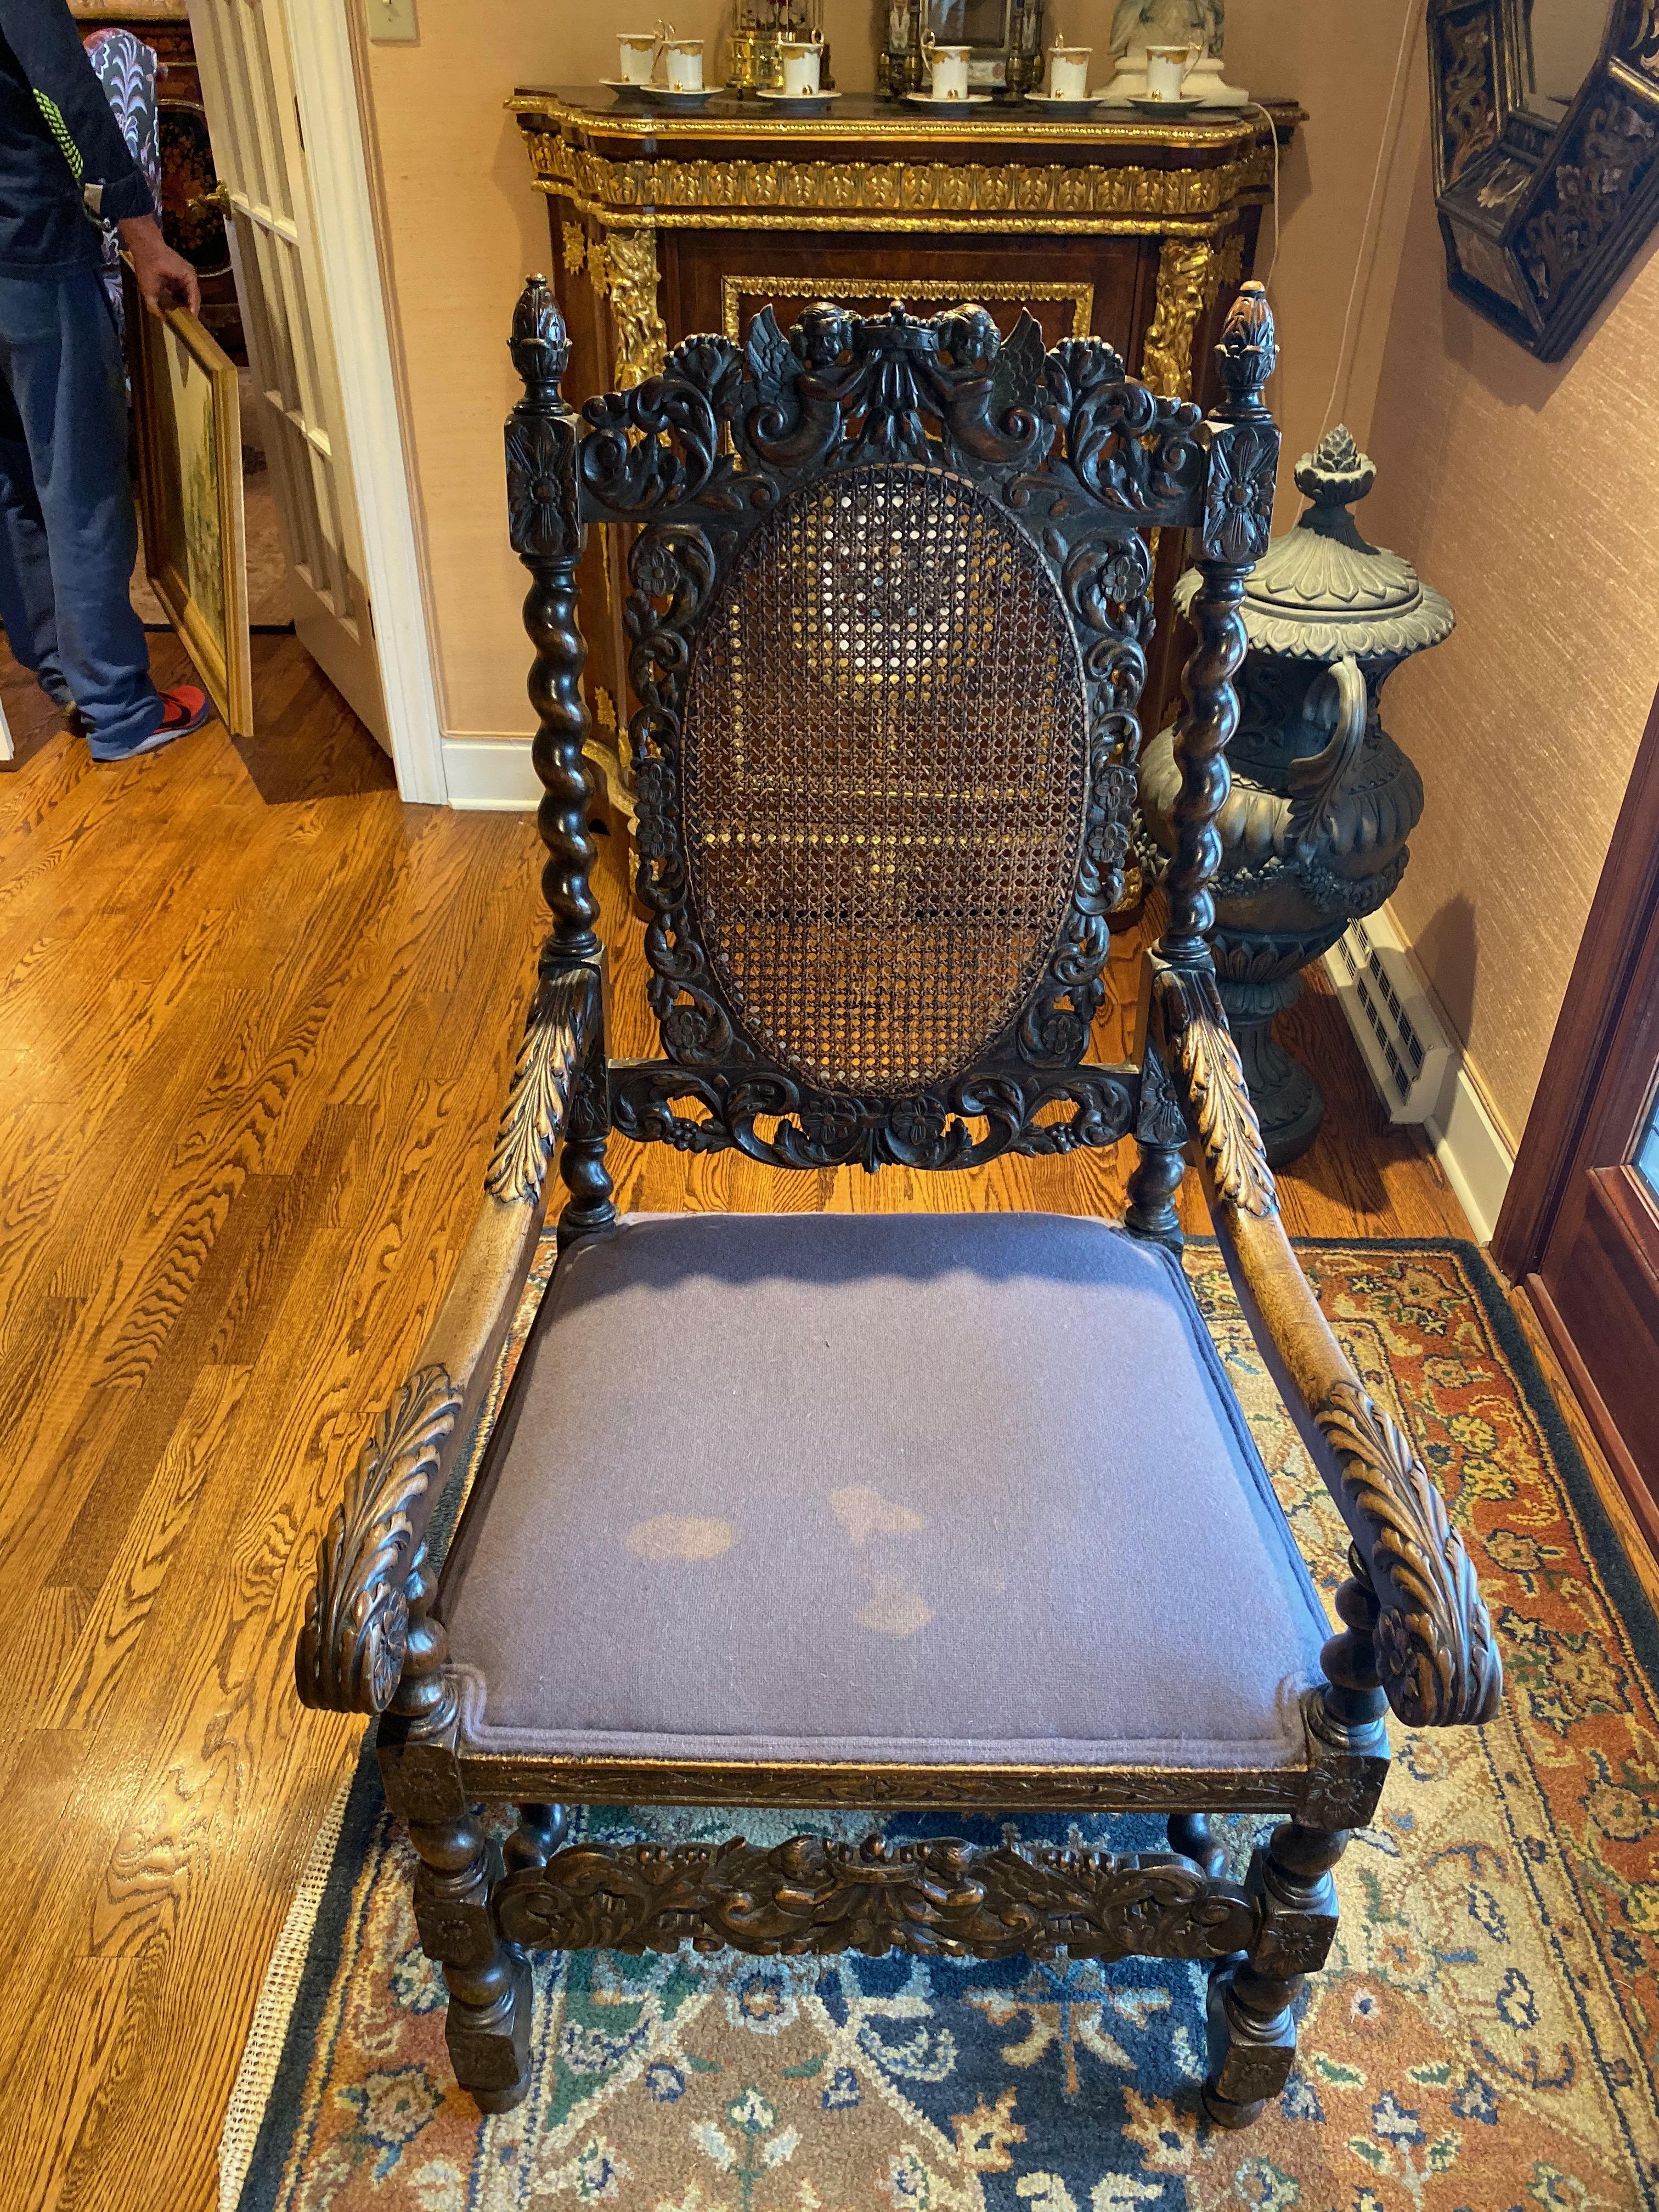 18th century French commerce antique carved wood chair. Excellent detailed wood carvings on armrests and backrests.